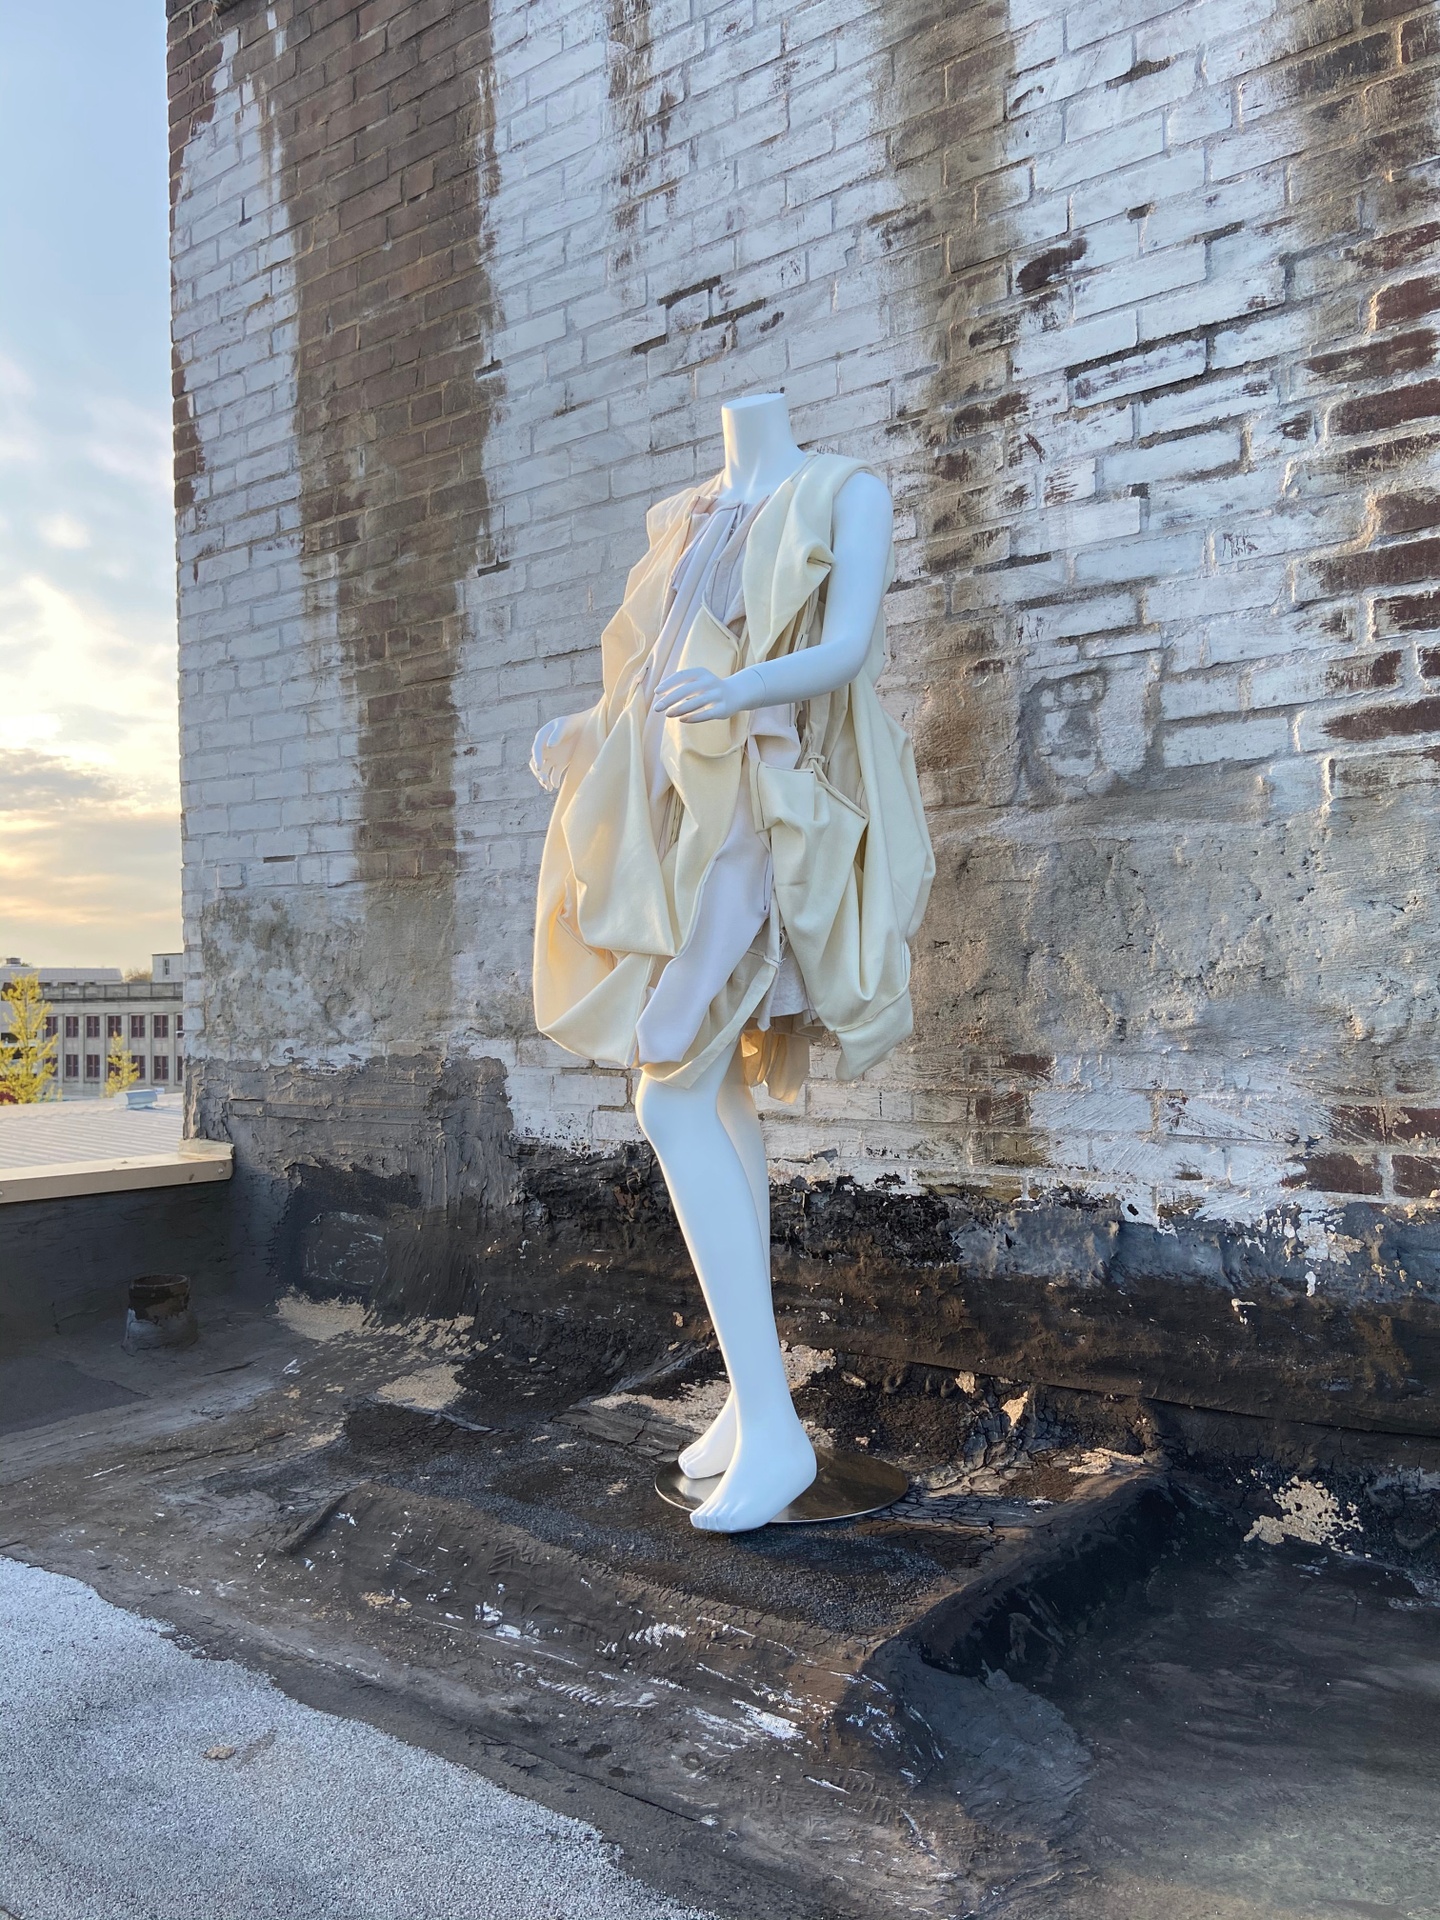 Mannequin wearing an off-white shift dress made of bunched and draped fabric. Mannequin is placed on a rooftop against a dirty whitewashed brick wall.